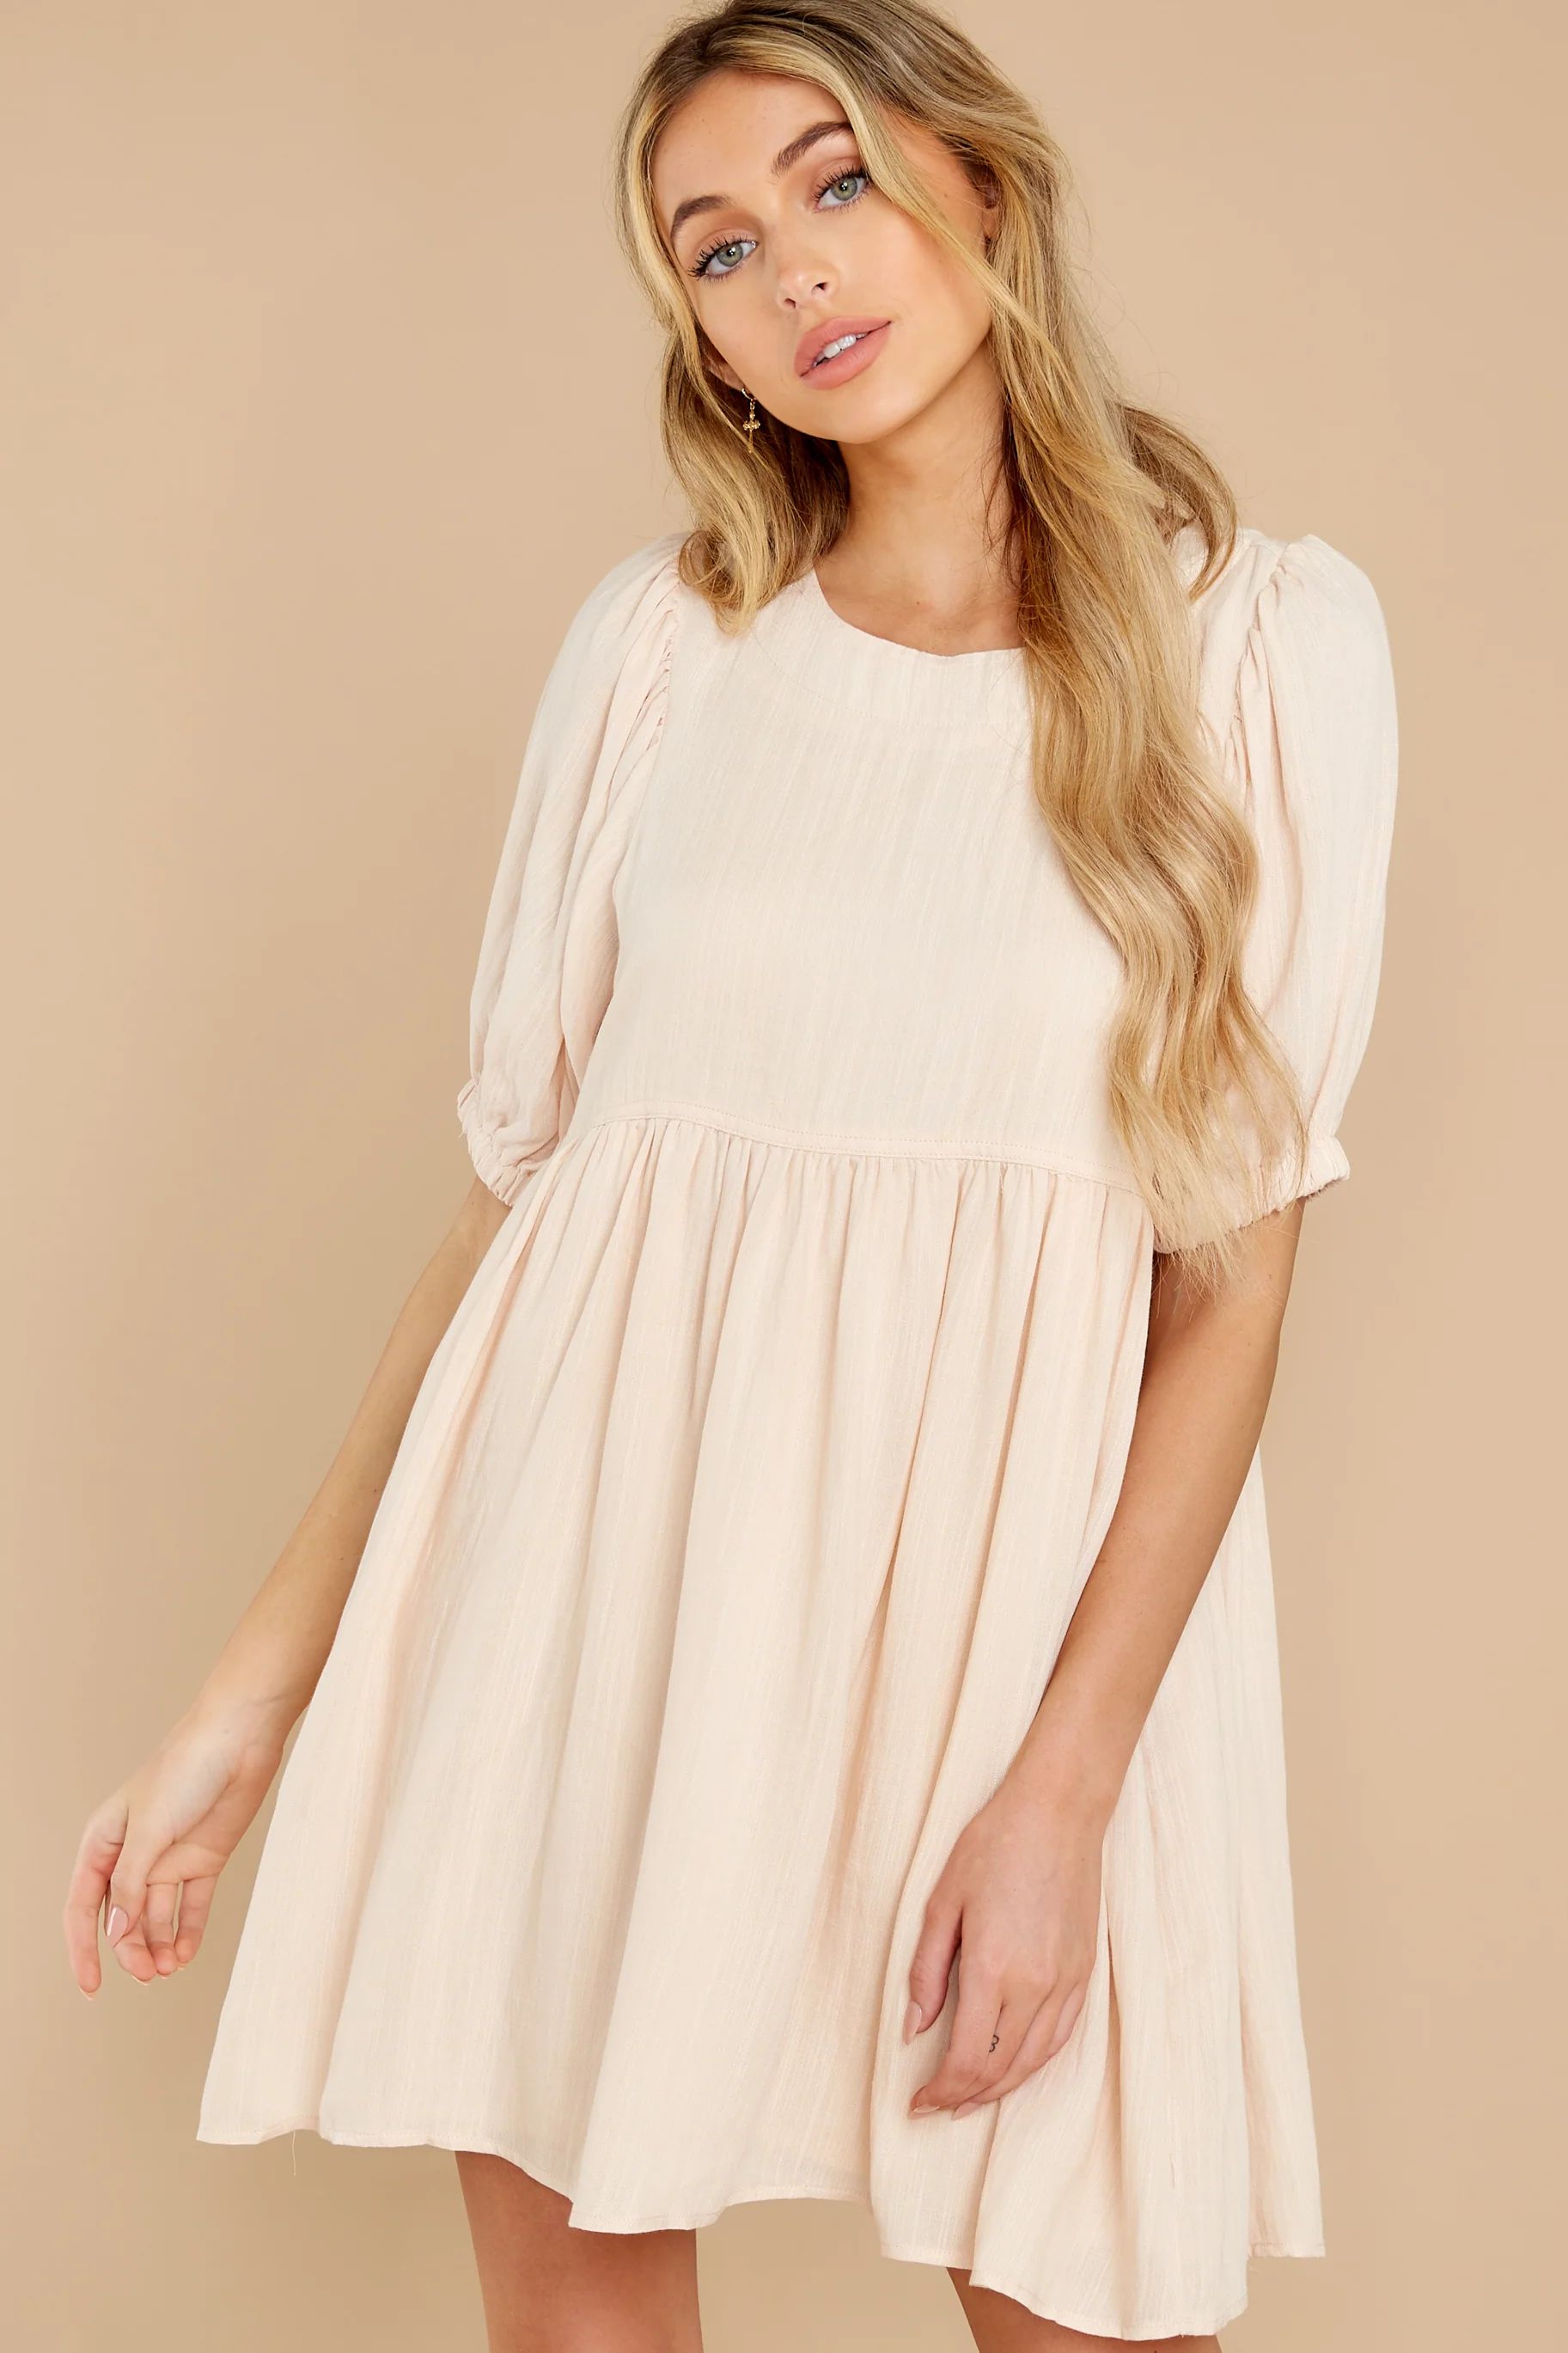 Tally The Compliments Cream Dress | Red Dress 